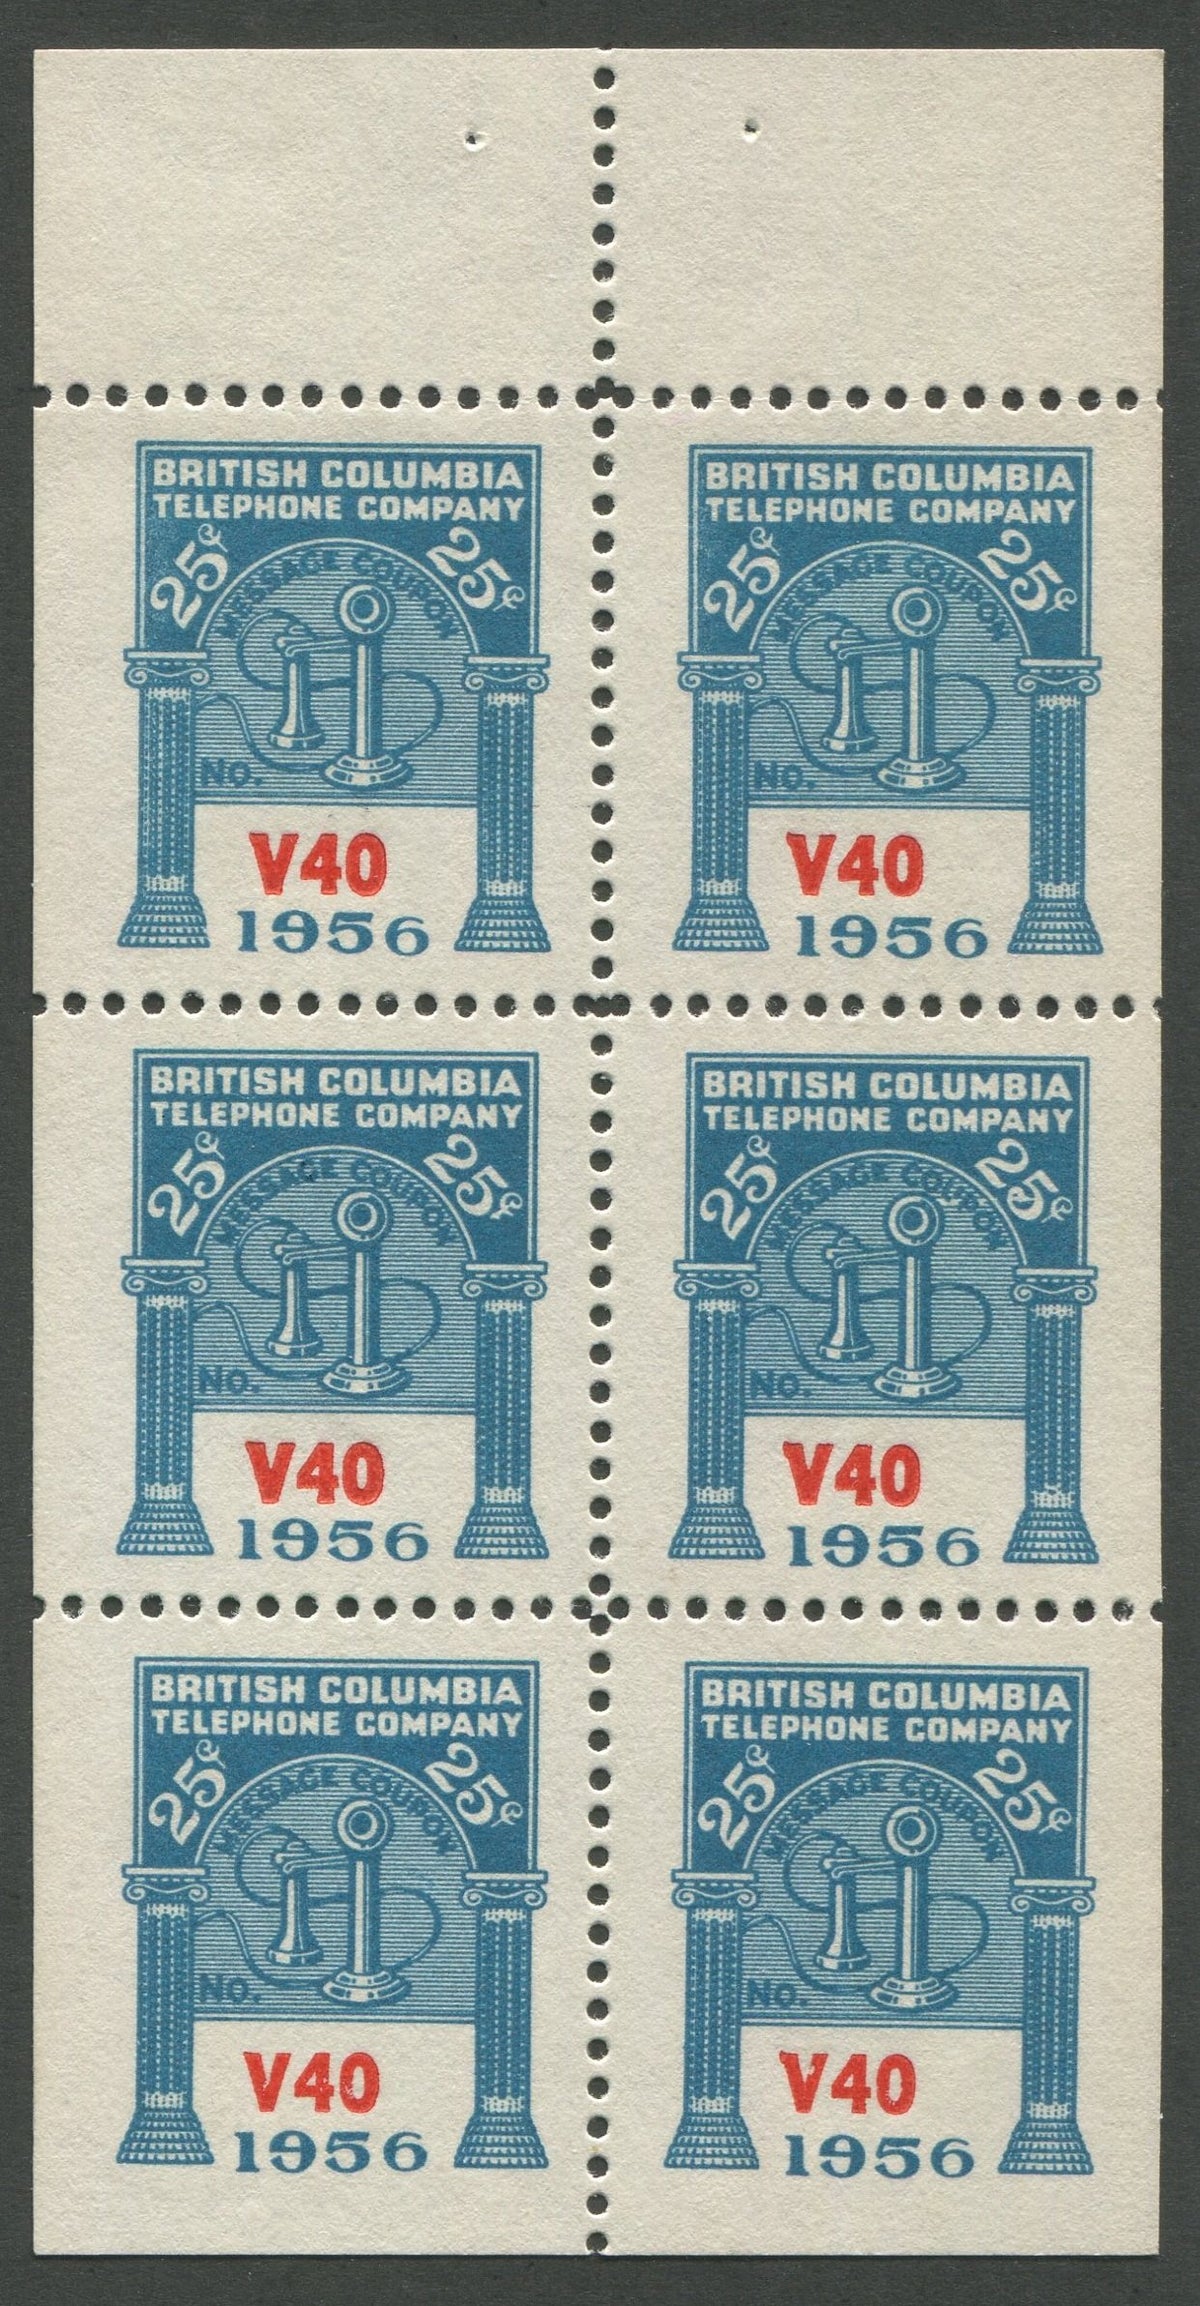 0277BC1708 - BCT179 - Mint Booklet Pane, Watermarked